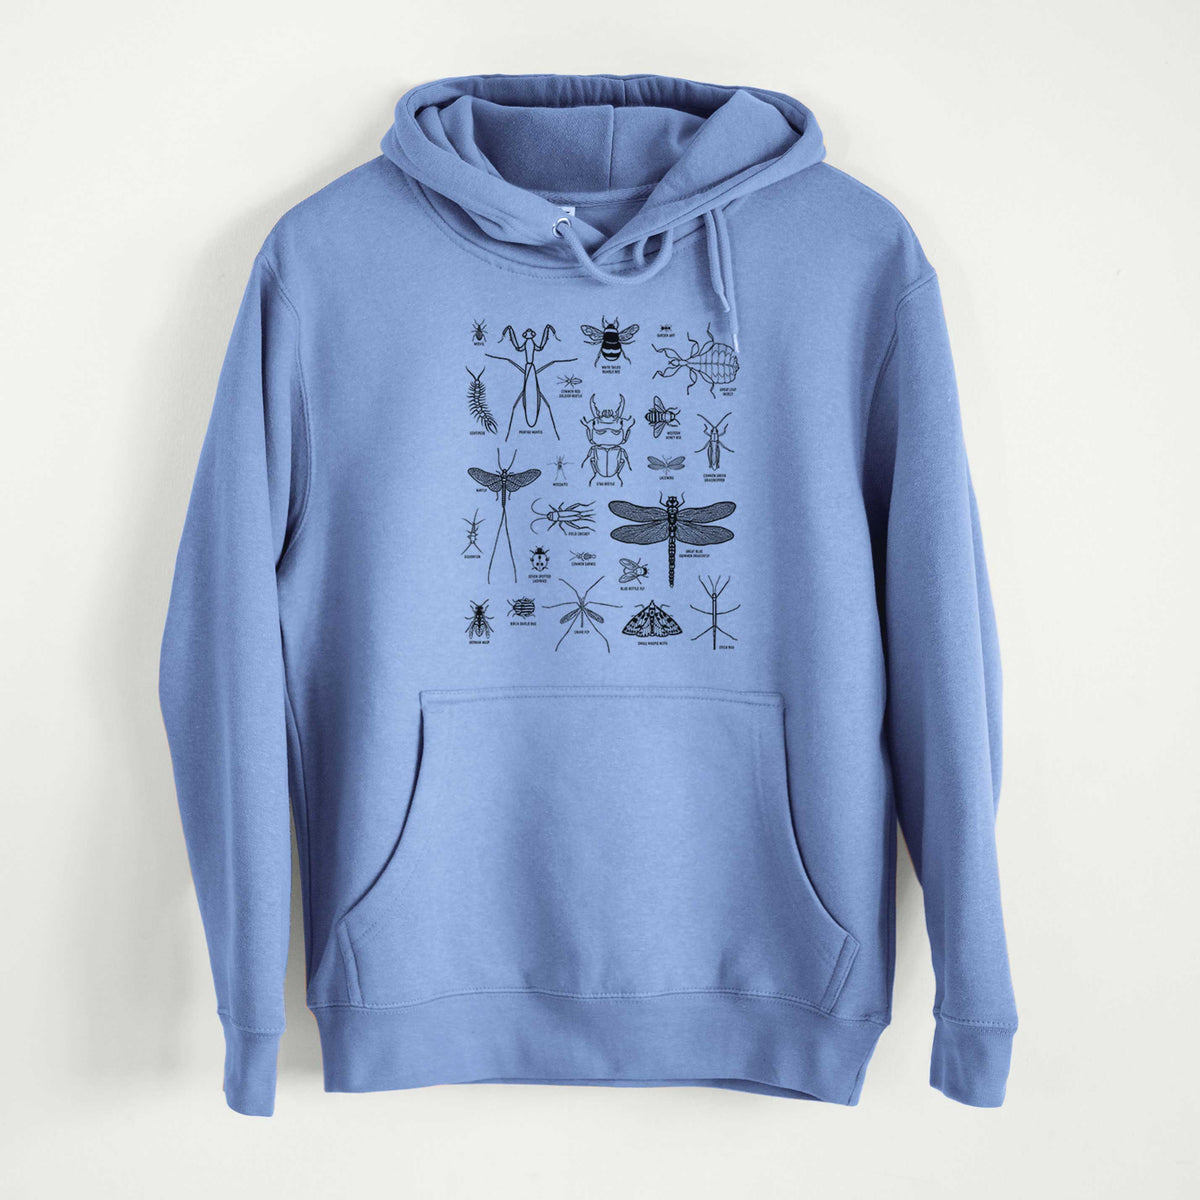 Chart of Arthropods/Insects  - Mid-Weight Unisex Premium Blend Hoodie